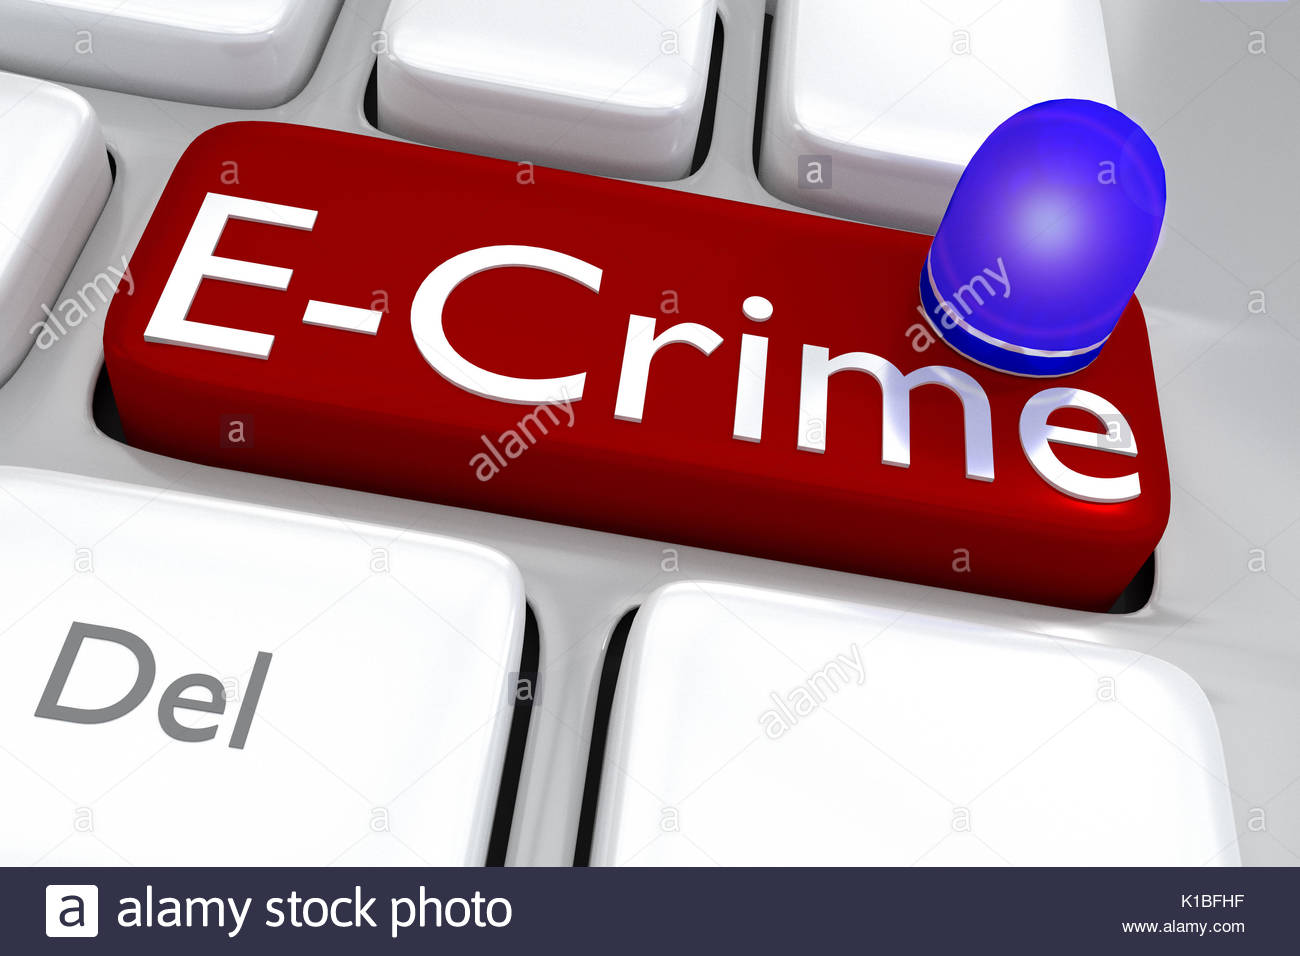 Render illustration of computer keyboard with the print E-Crime on a red  button with a police car roof lamp